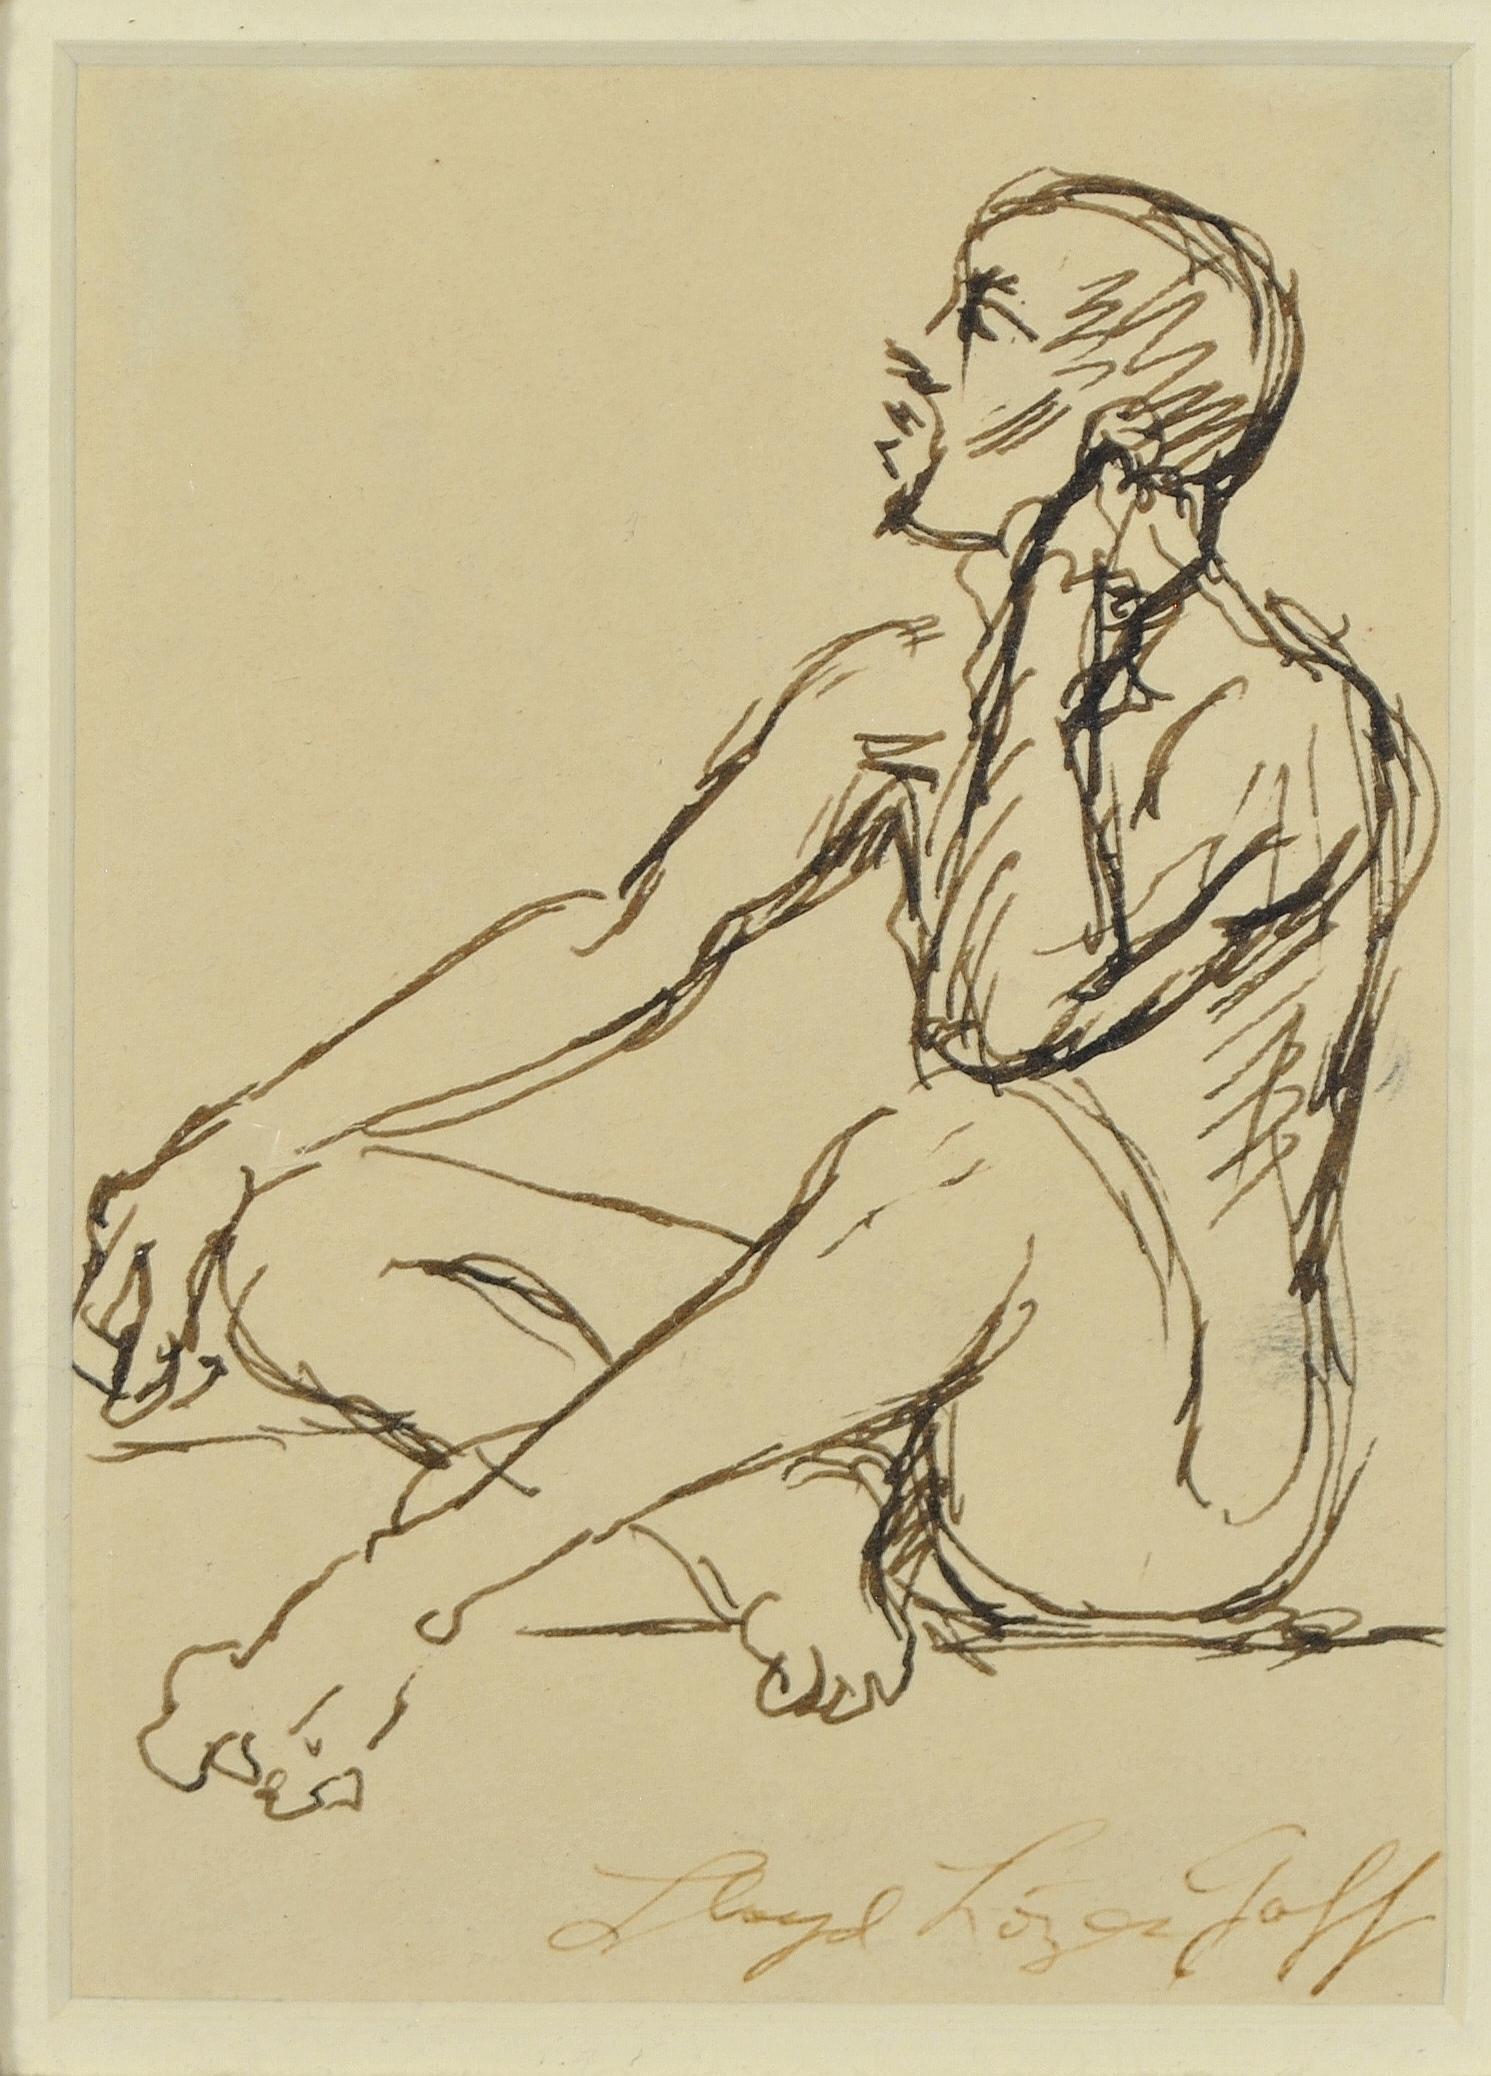 A beautiful mid 20th century pen and ink figurative study of a seated man titled ''Listening'' by American artist Lloyd Lozes Goff.

Artist: Lloyd Lozes Goff (American, 1908-1982)
Title: Listening
Medium: Pen & ink on paper
Size: 12.5 x 10.5 inches